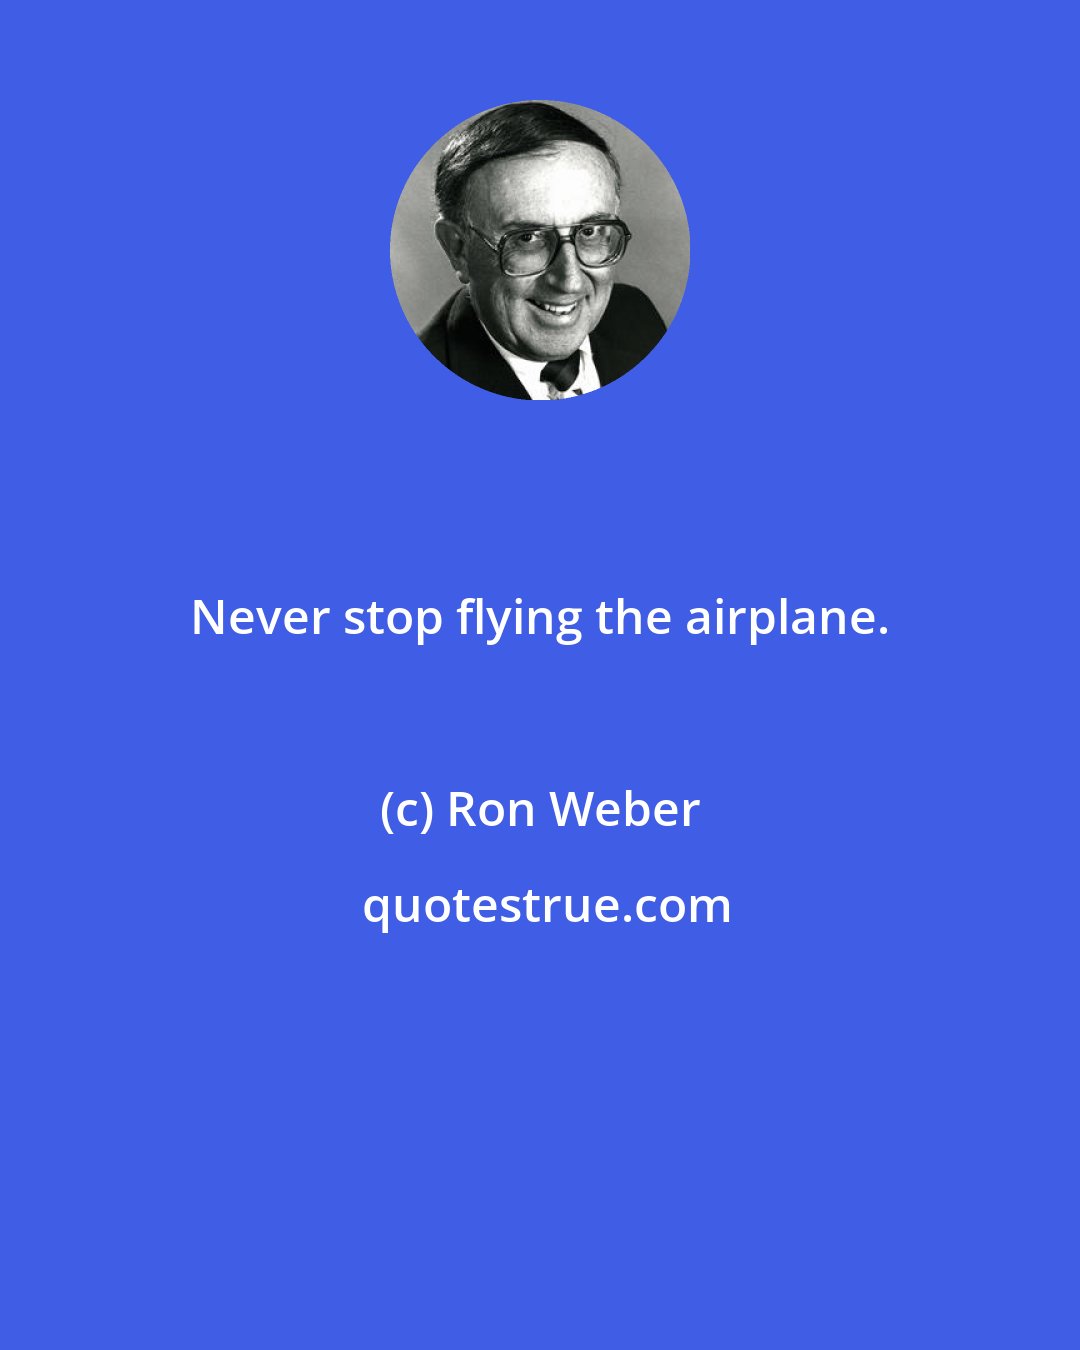 Ron Weber: Never stop flying the airplane.